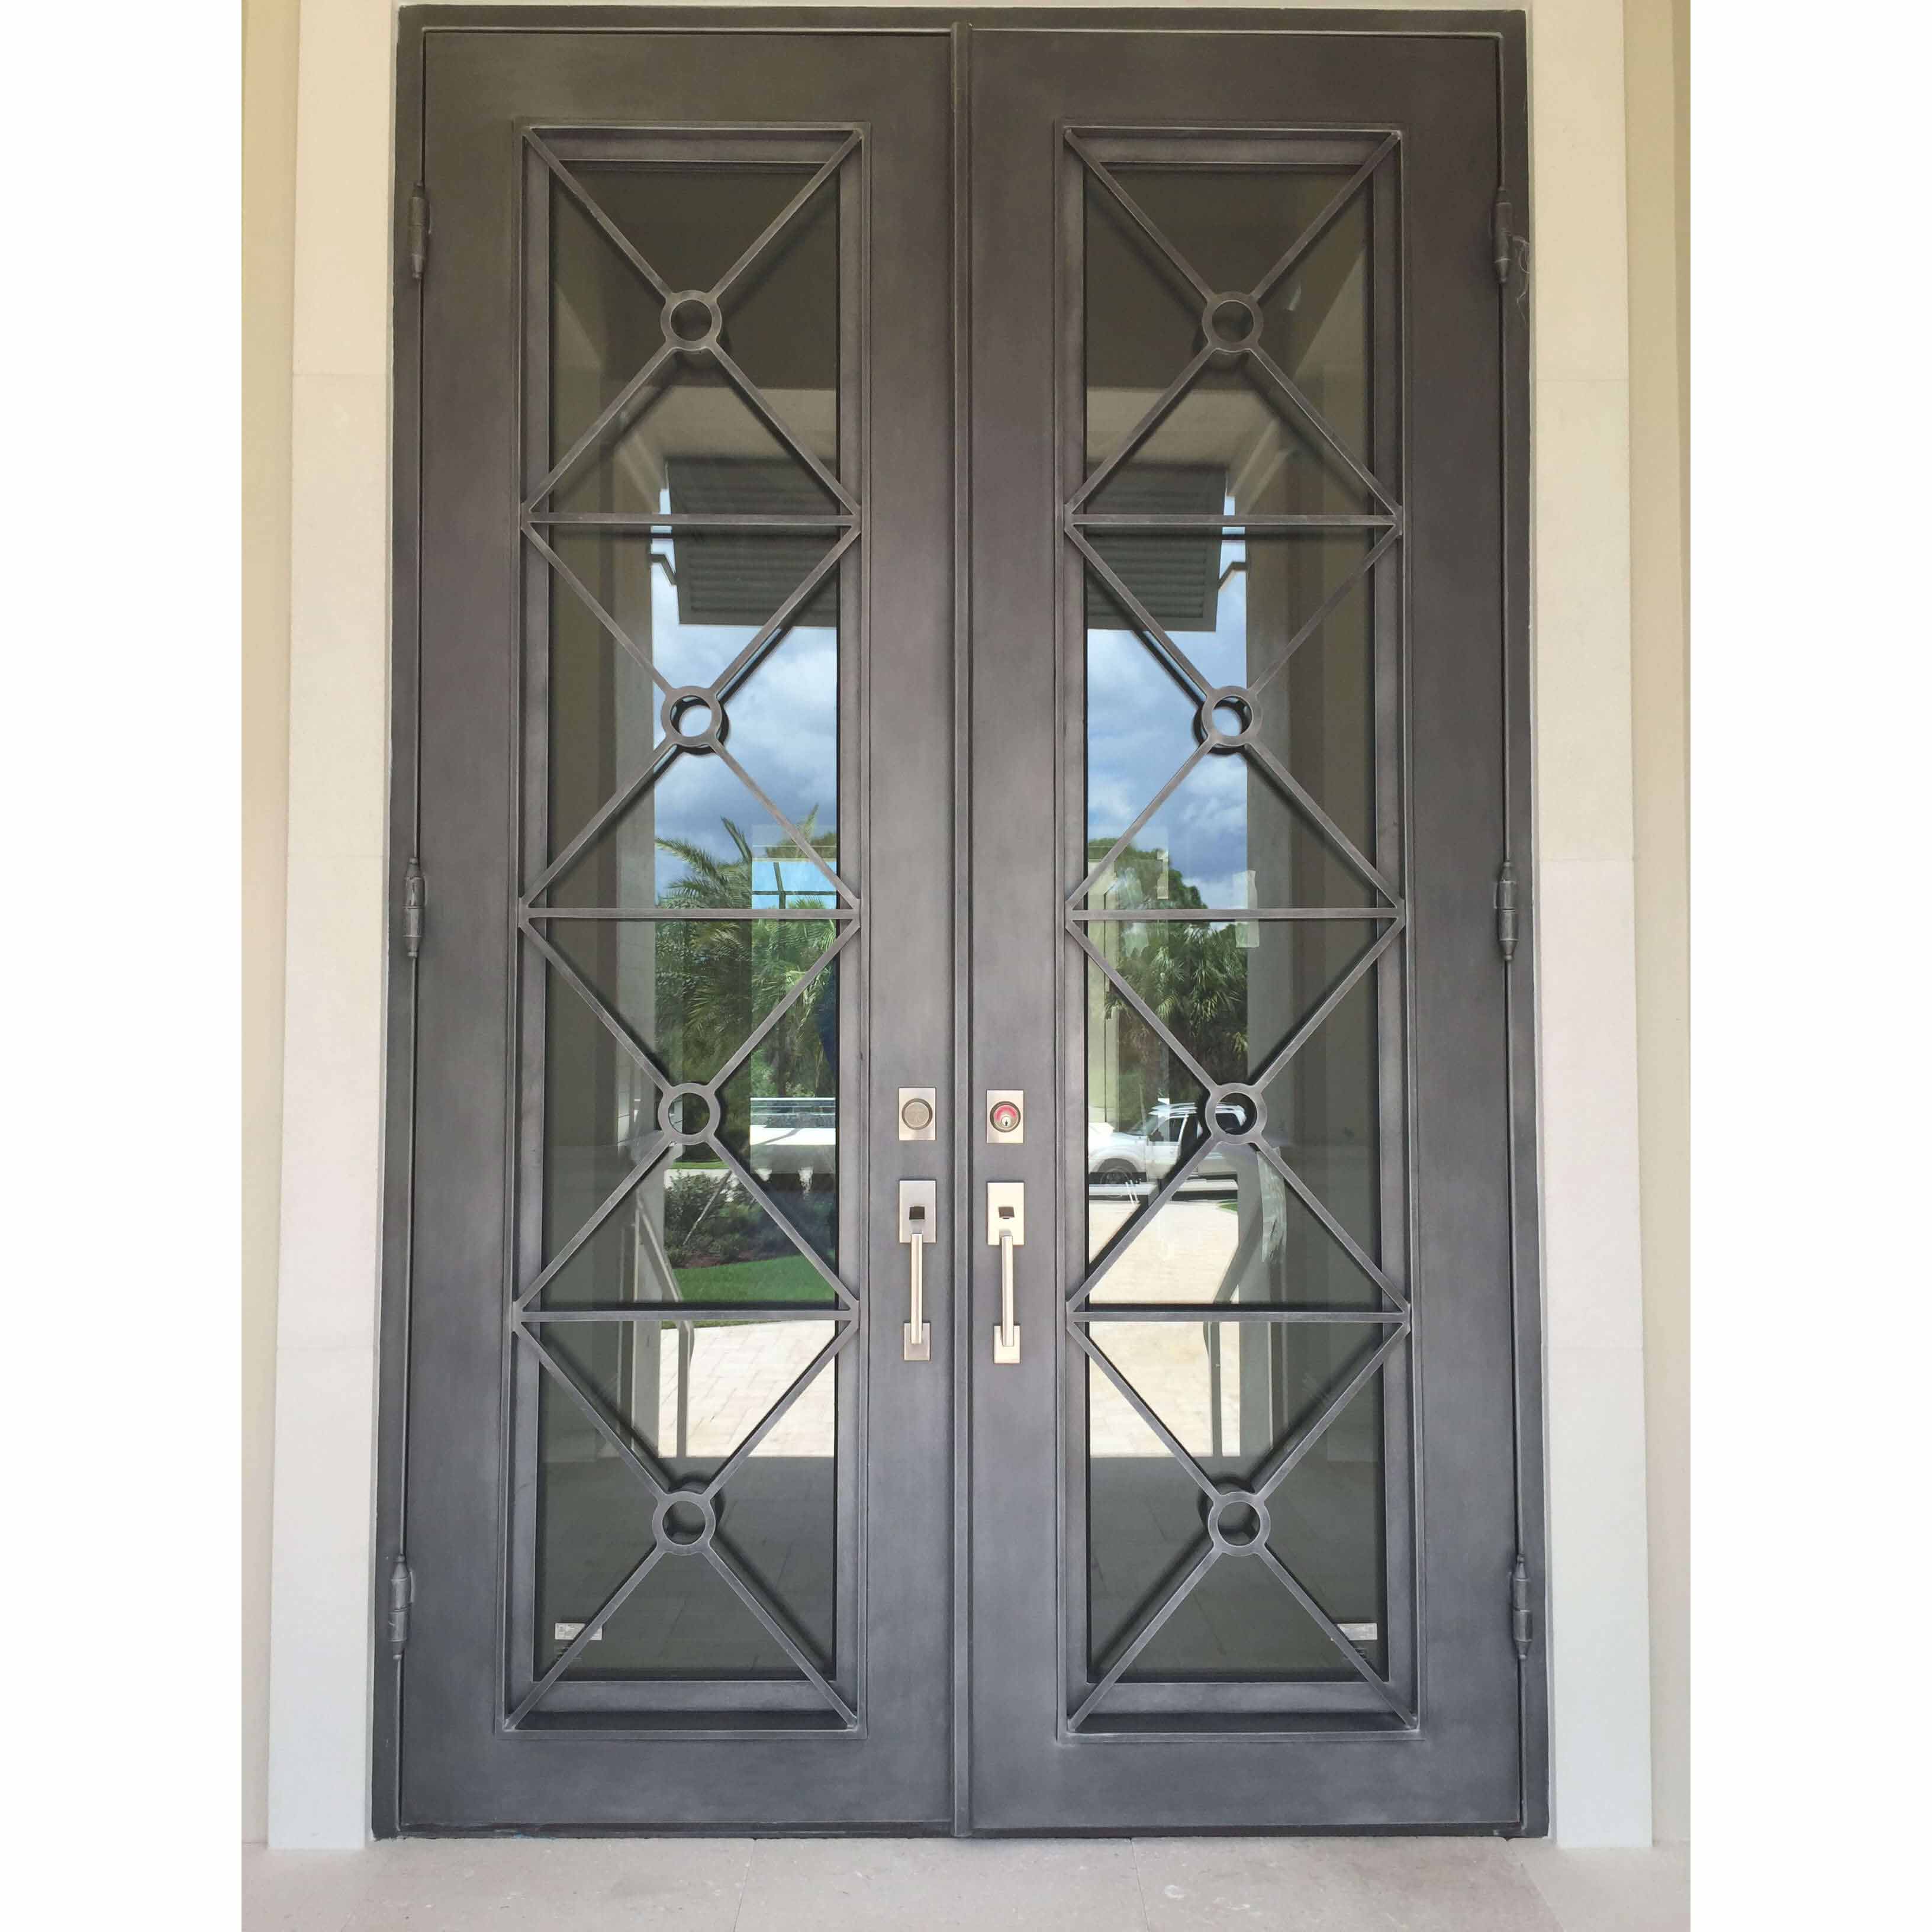 thermal break metal iron double door with double pane low e clear glass